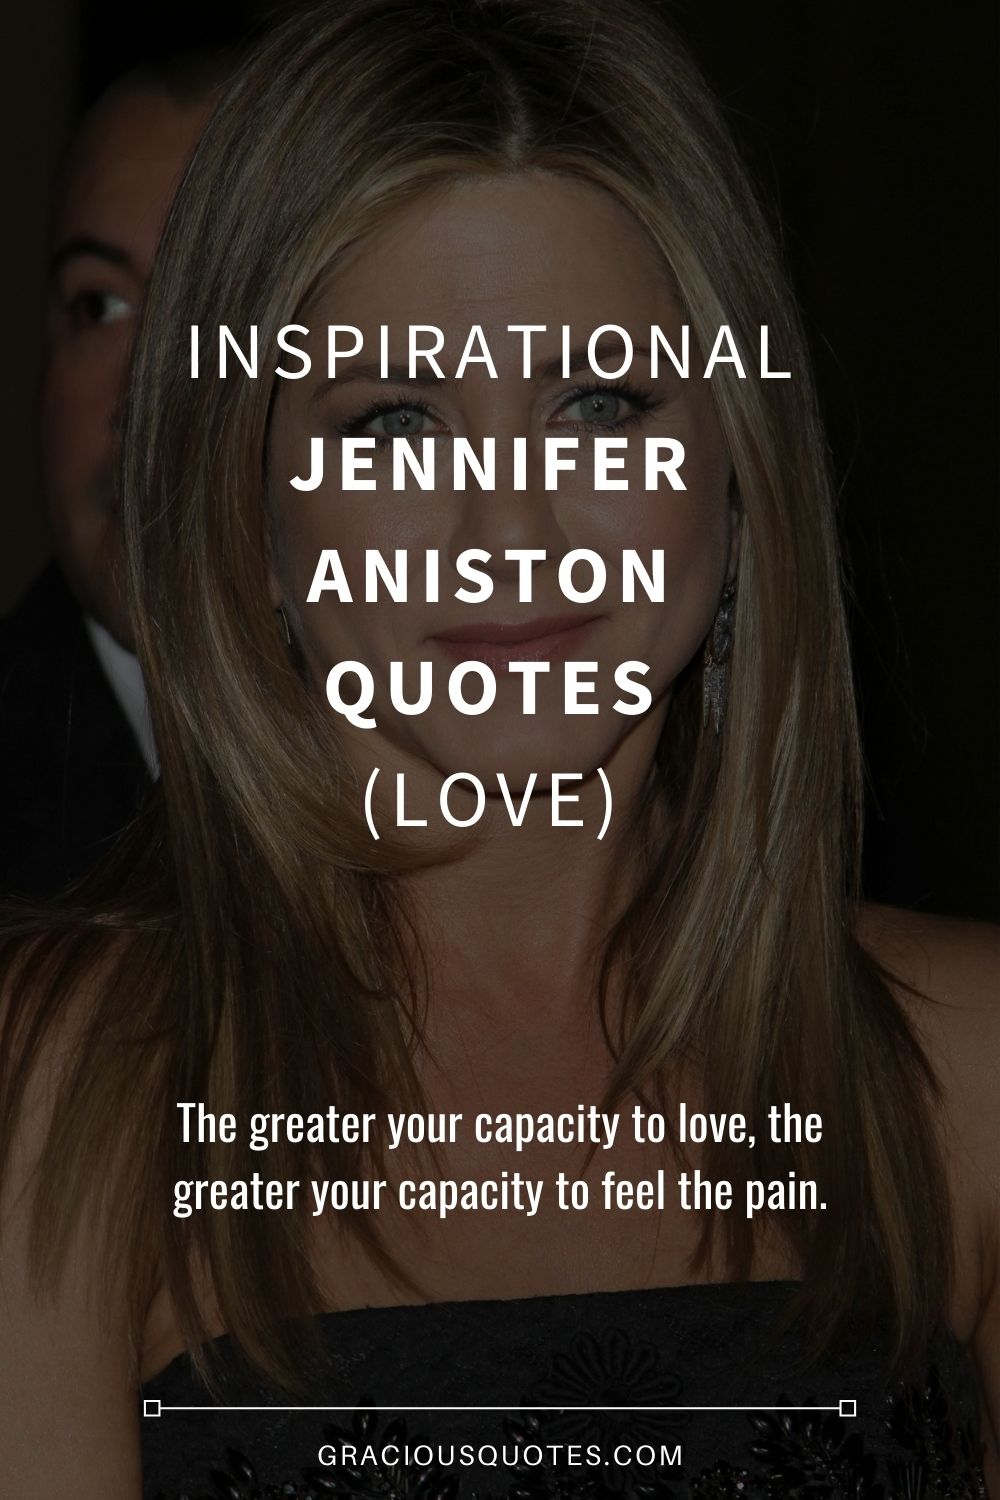 Inspirational Jennifer Aniston Quotes (LOVE) - Gracious Quotes